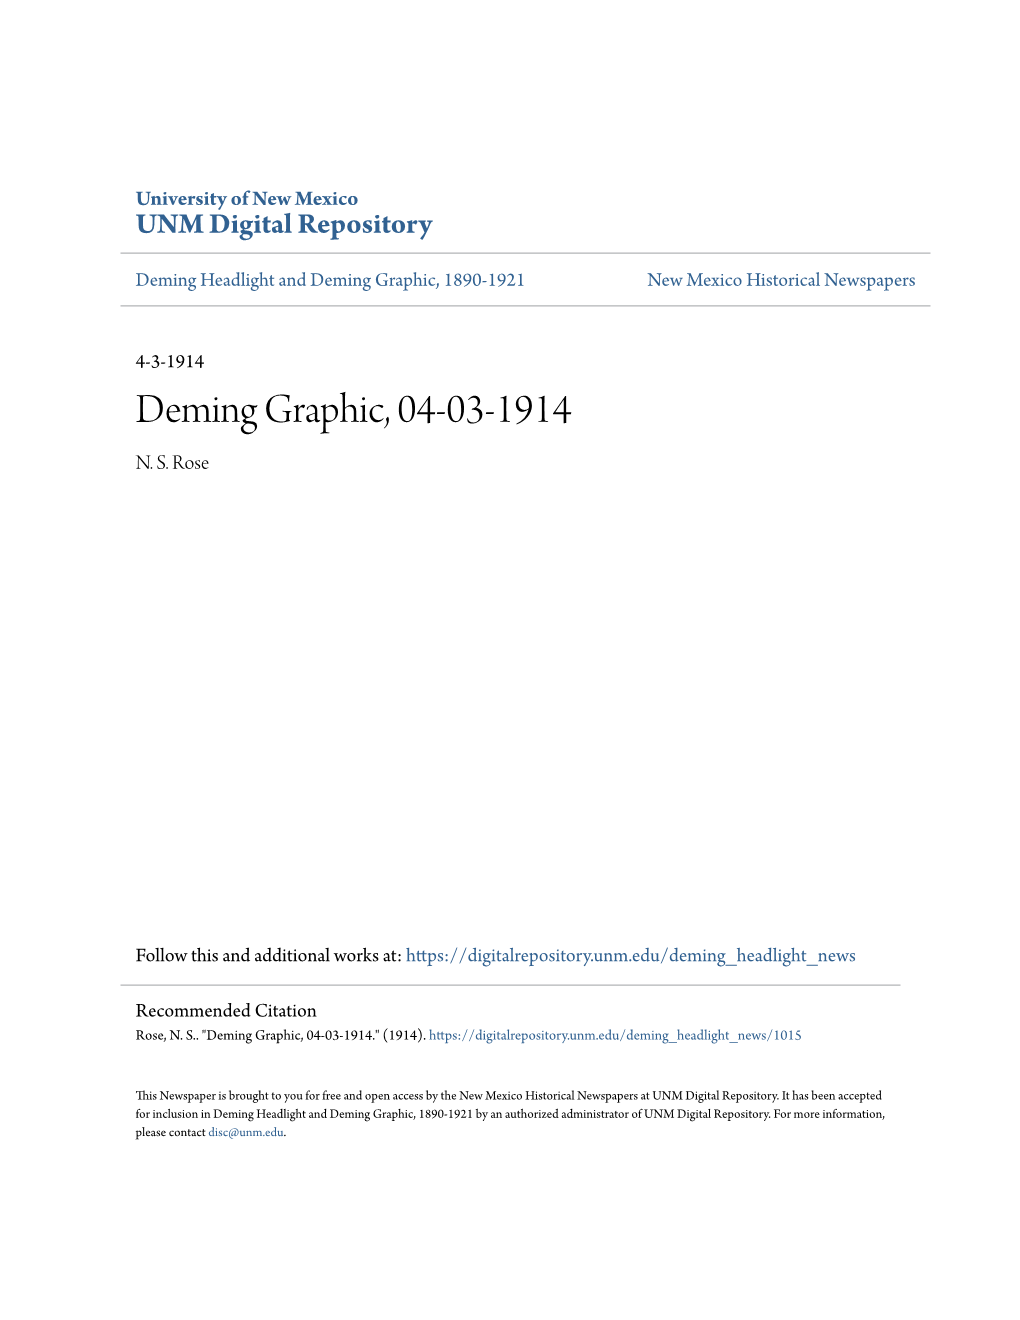 Deming Graphic, 04-03-1914 N